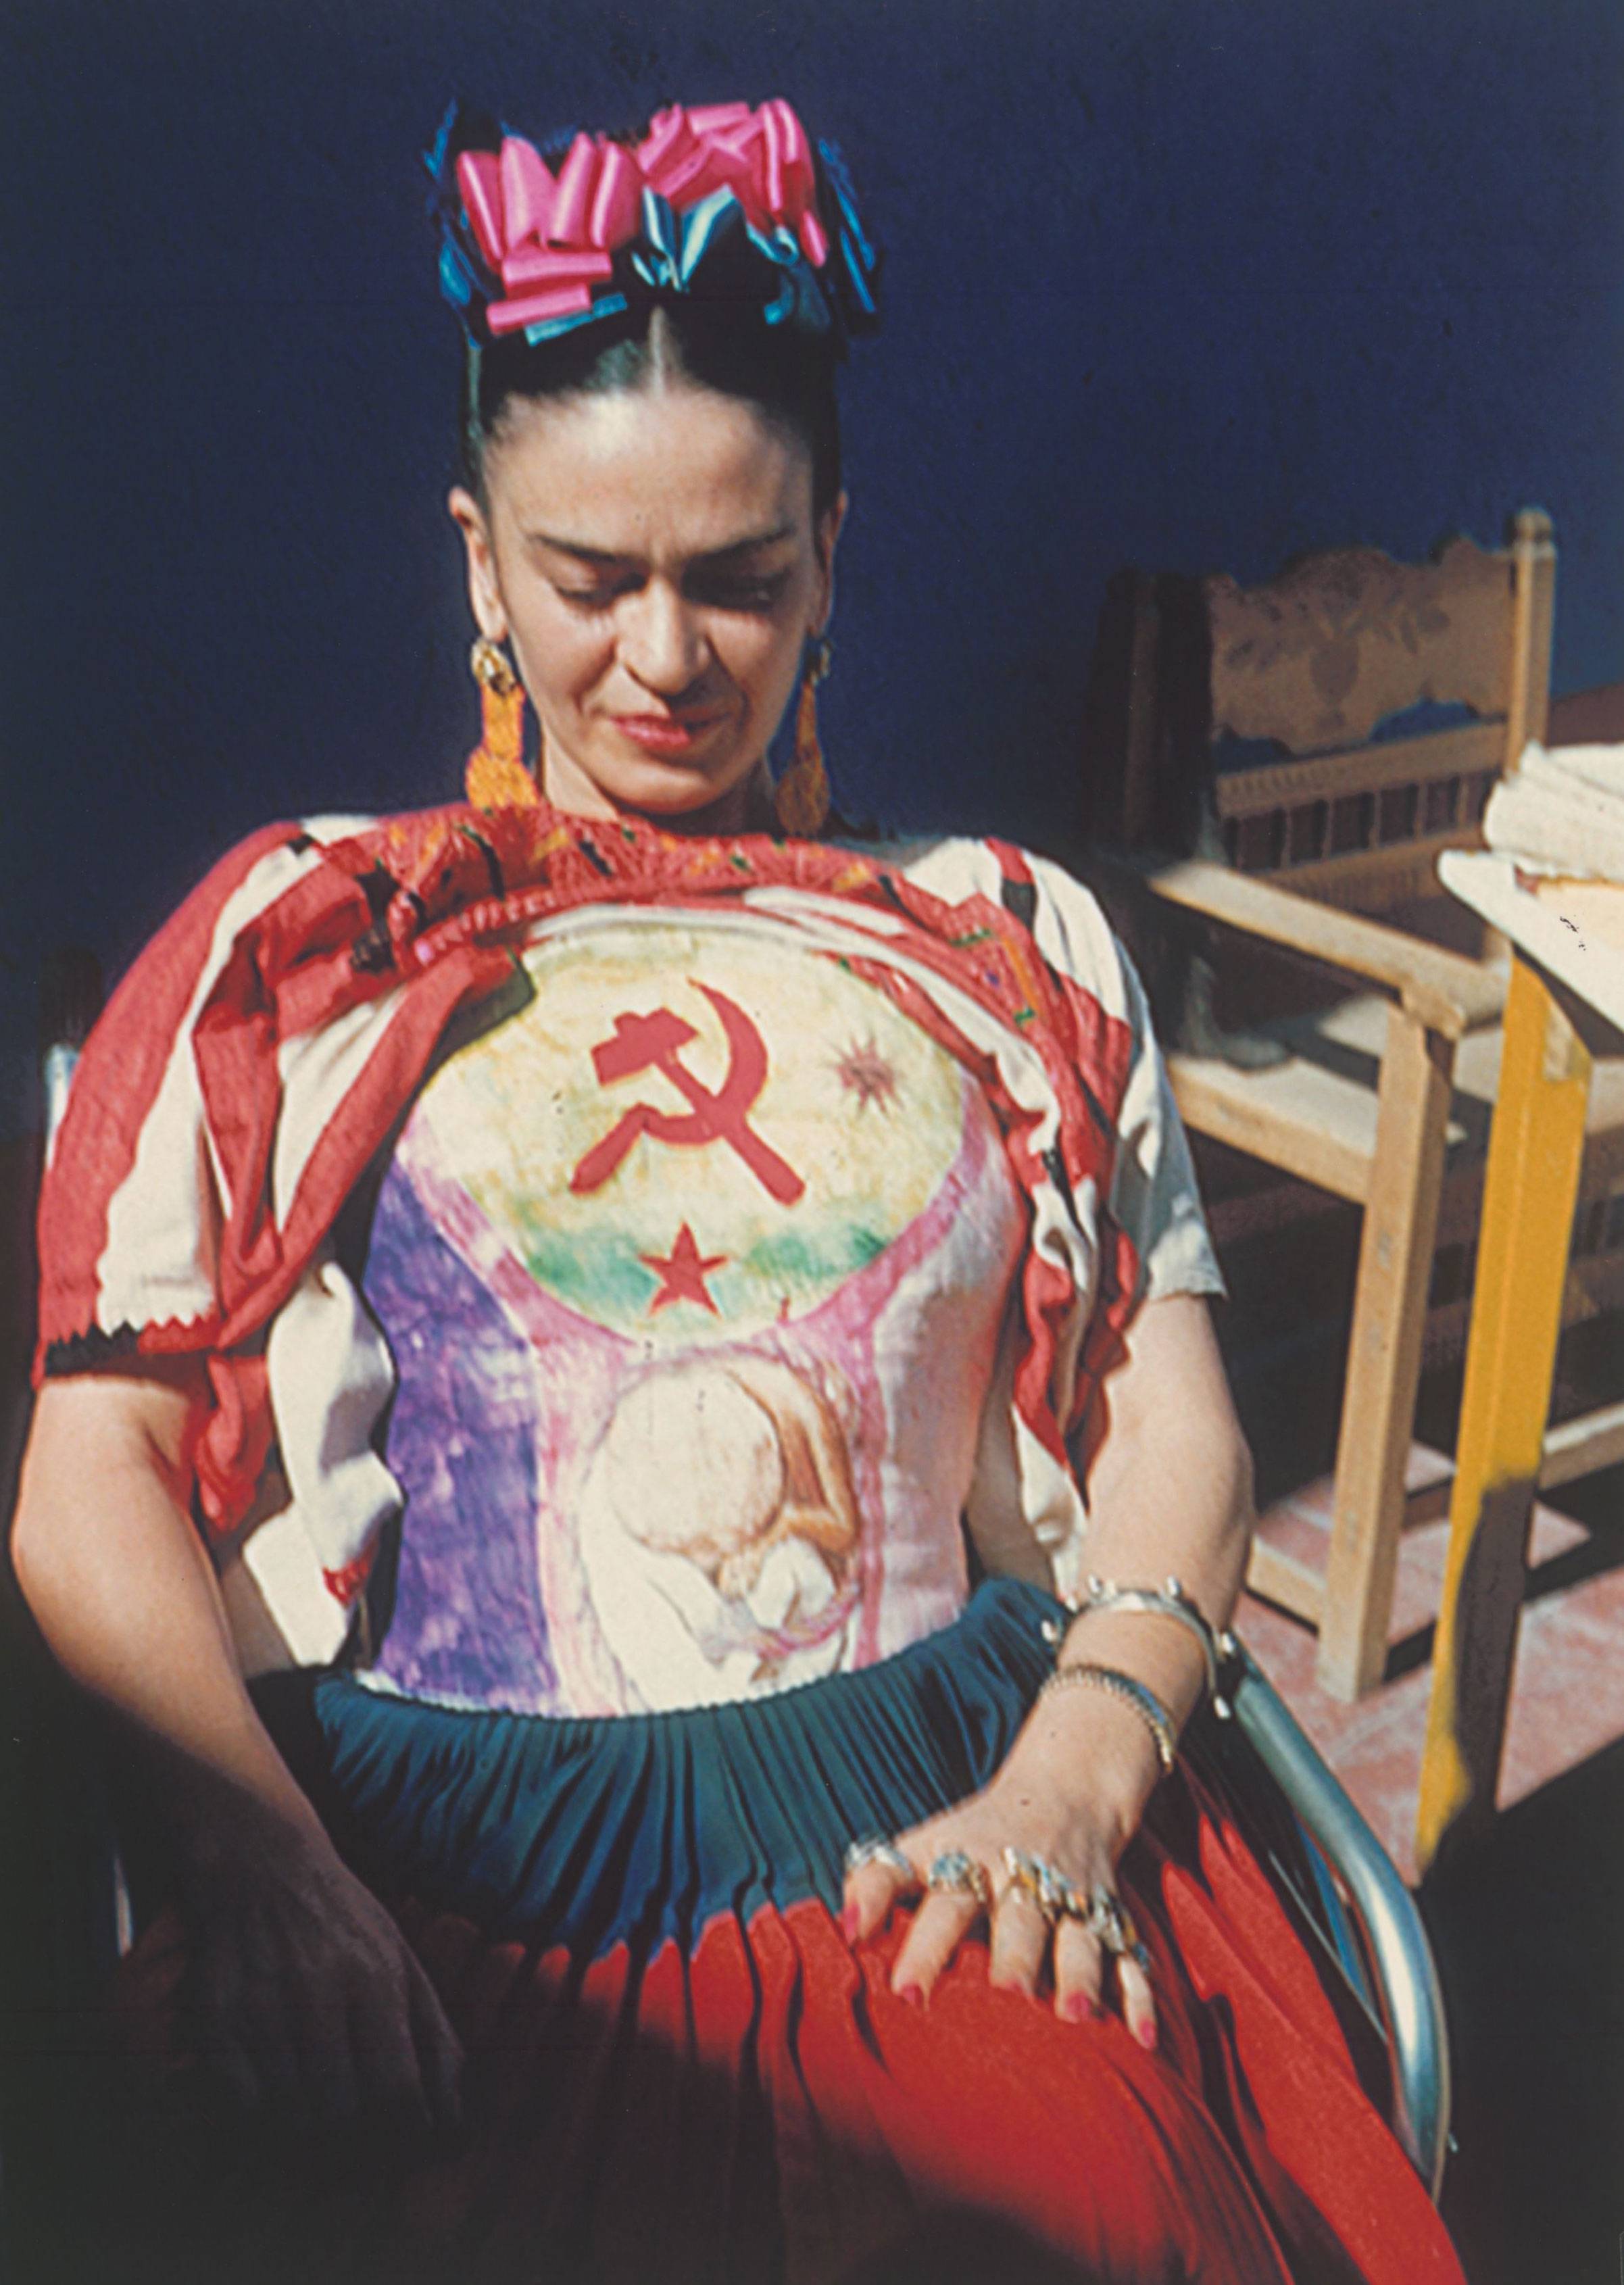 Frida Kahlo révélant son corset peint sous son huipil par Florence Arquin, vers 1951 © DR, collection privée © Diego Rivera and Frida Kahlo archives, Bank of México, fiduciary in the Frida Kahlo and Diego Rivera Museums Trust